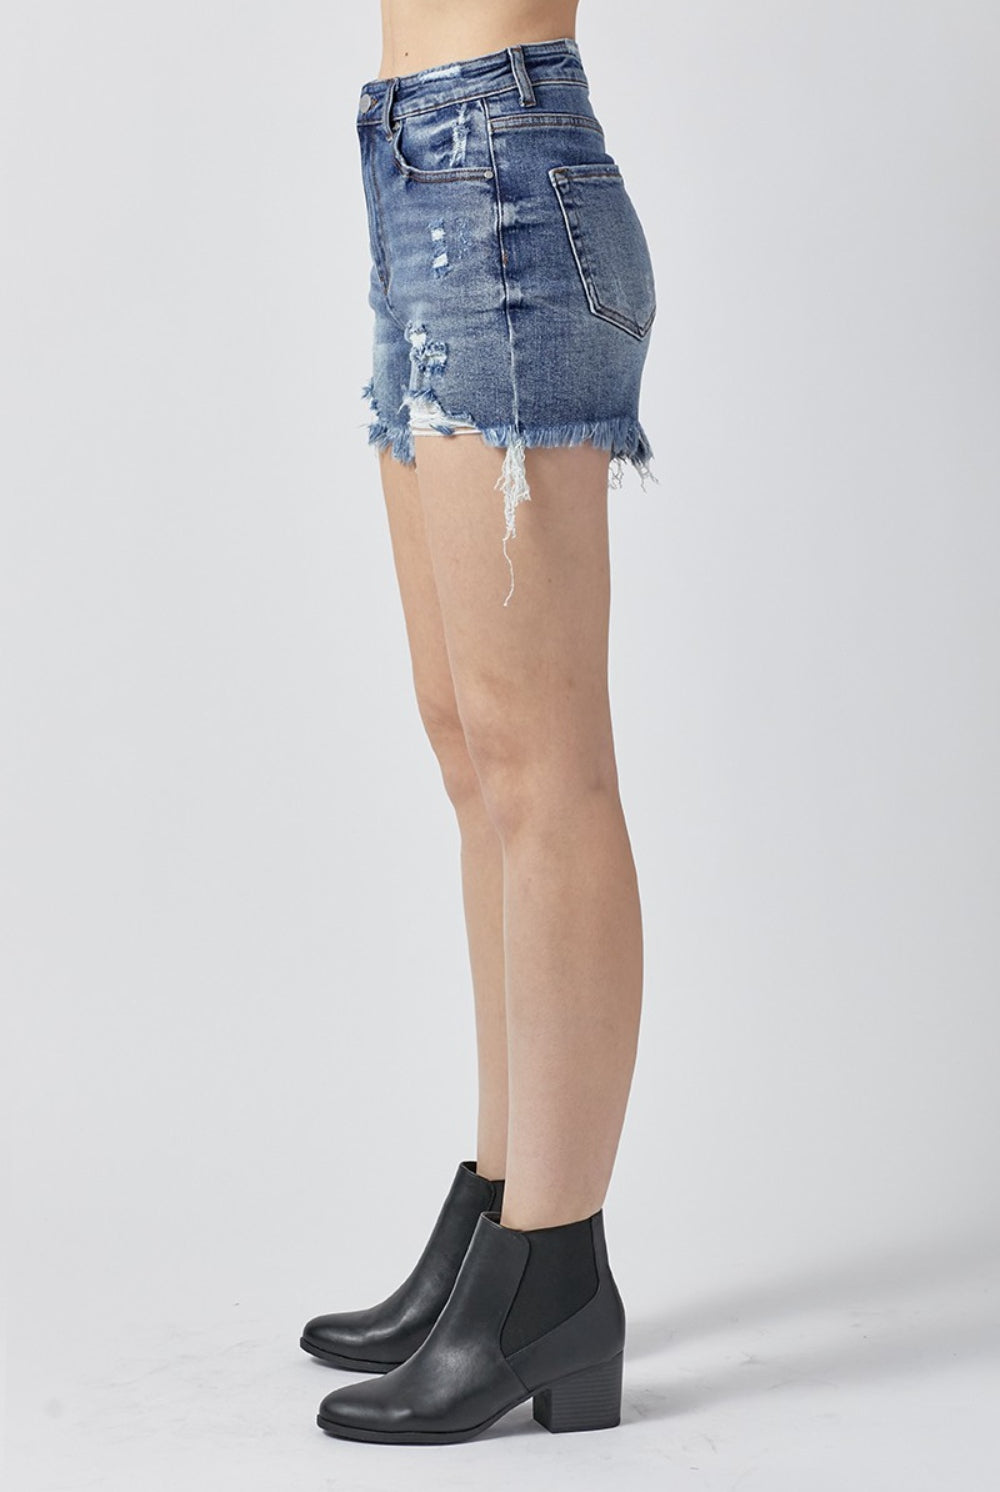 Close-up of Chic Distressed Denim Shorts, with attention to the frayed hem and detailed distressing, embodying a trendy and casual summer vibe.